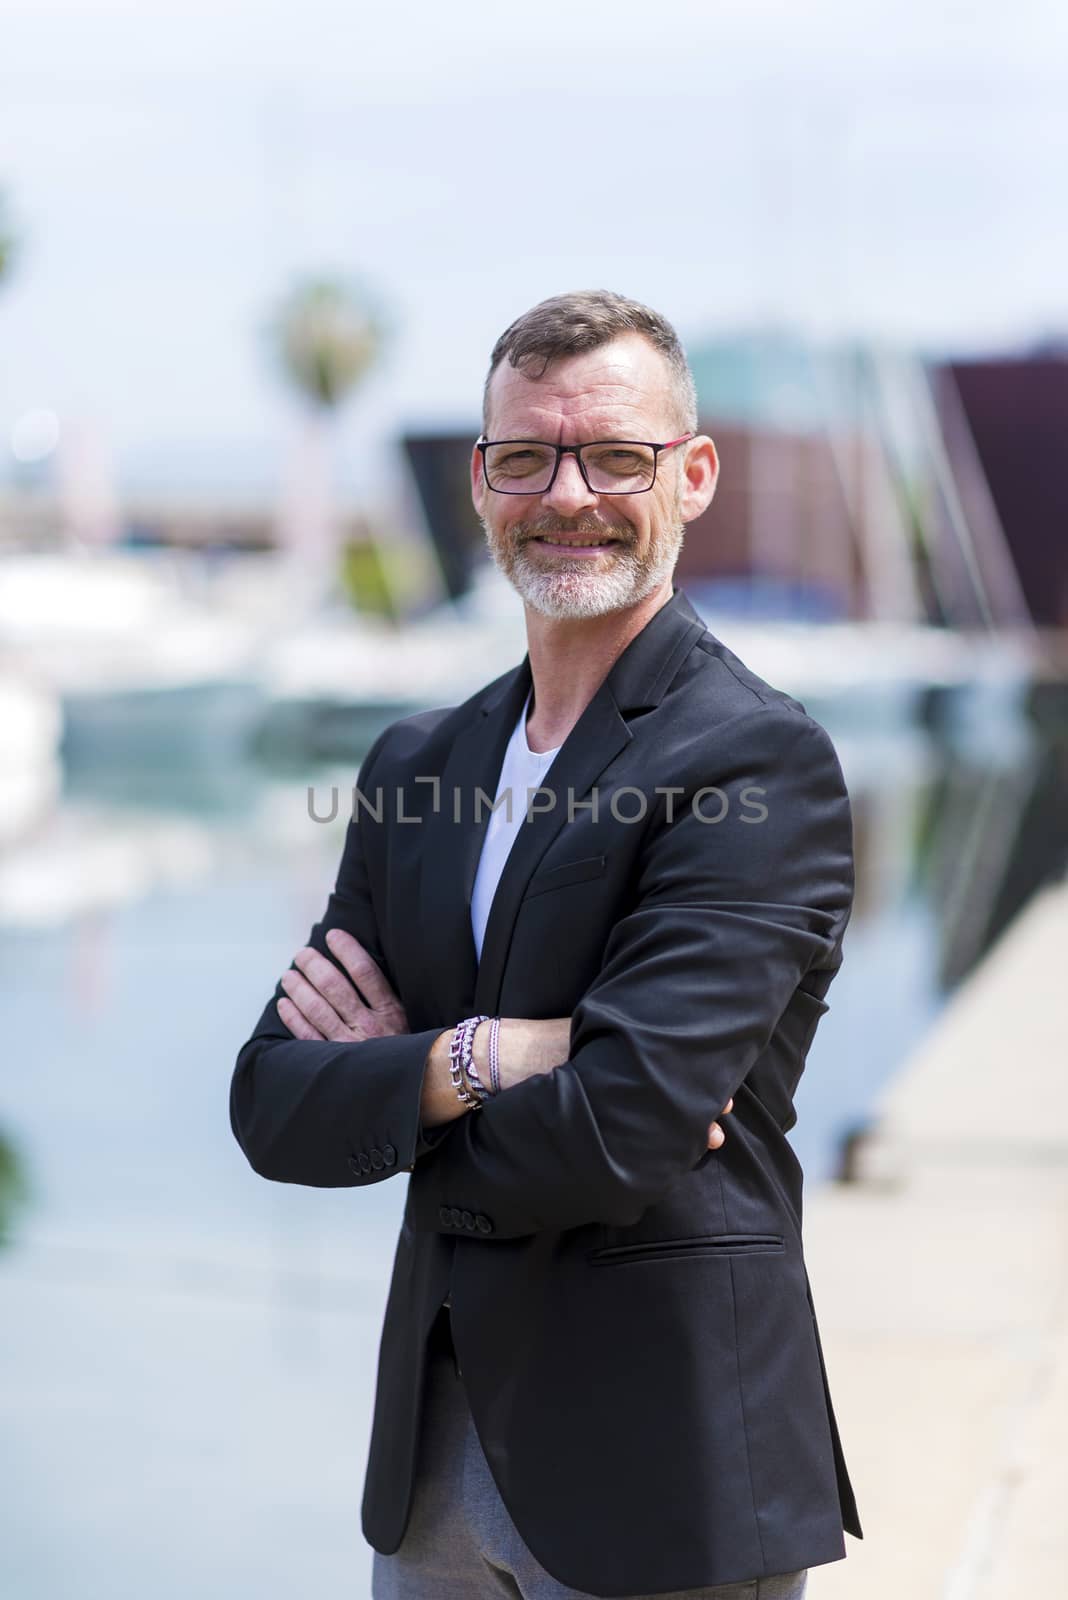 Businessman standing in the city arms crossed while looking camera and smiling